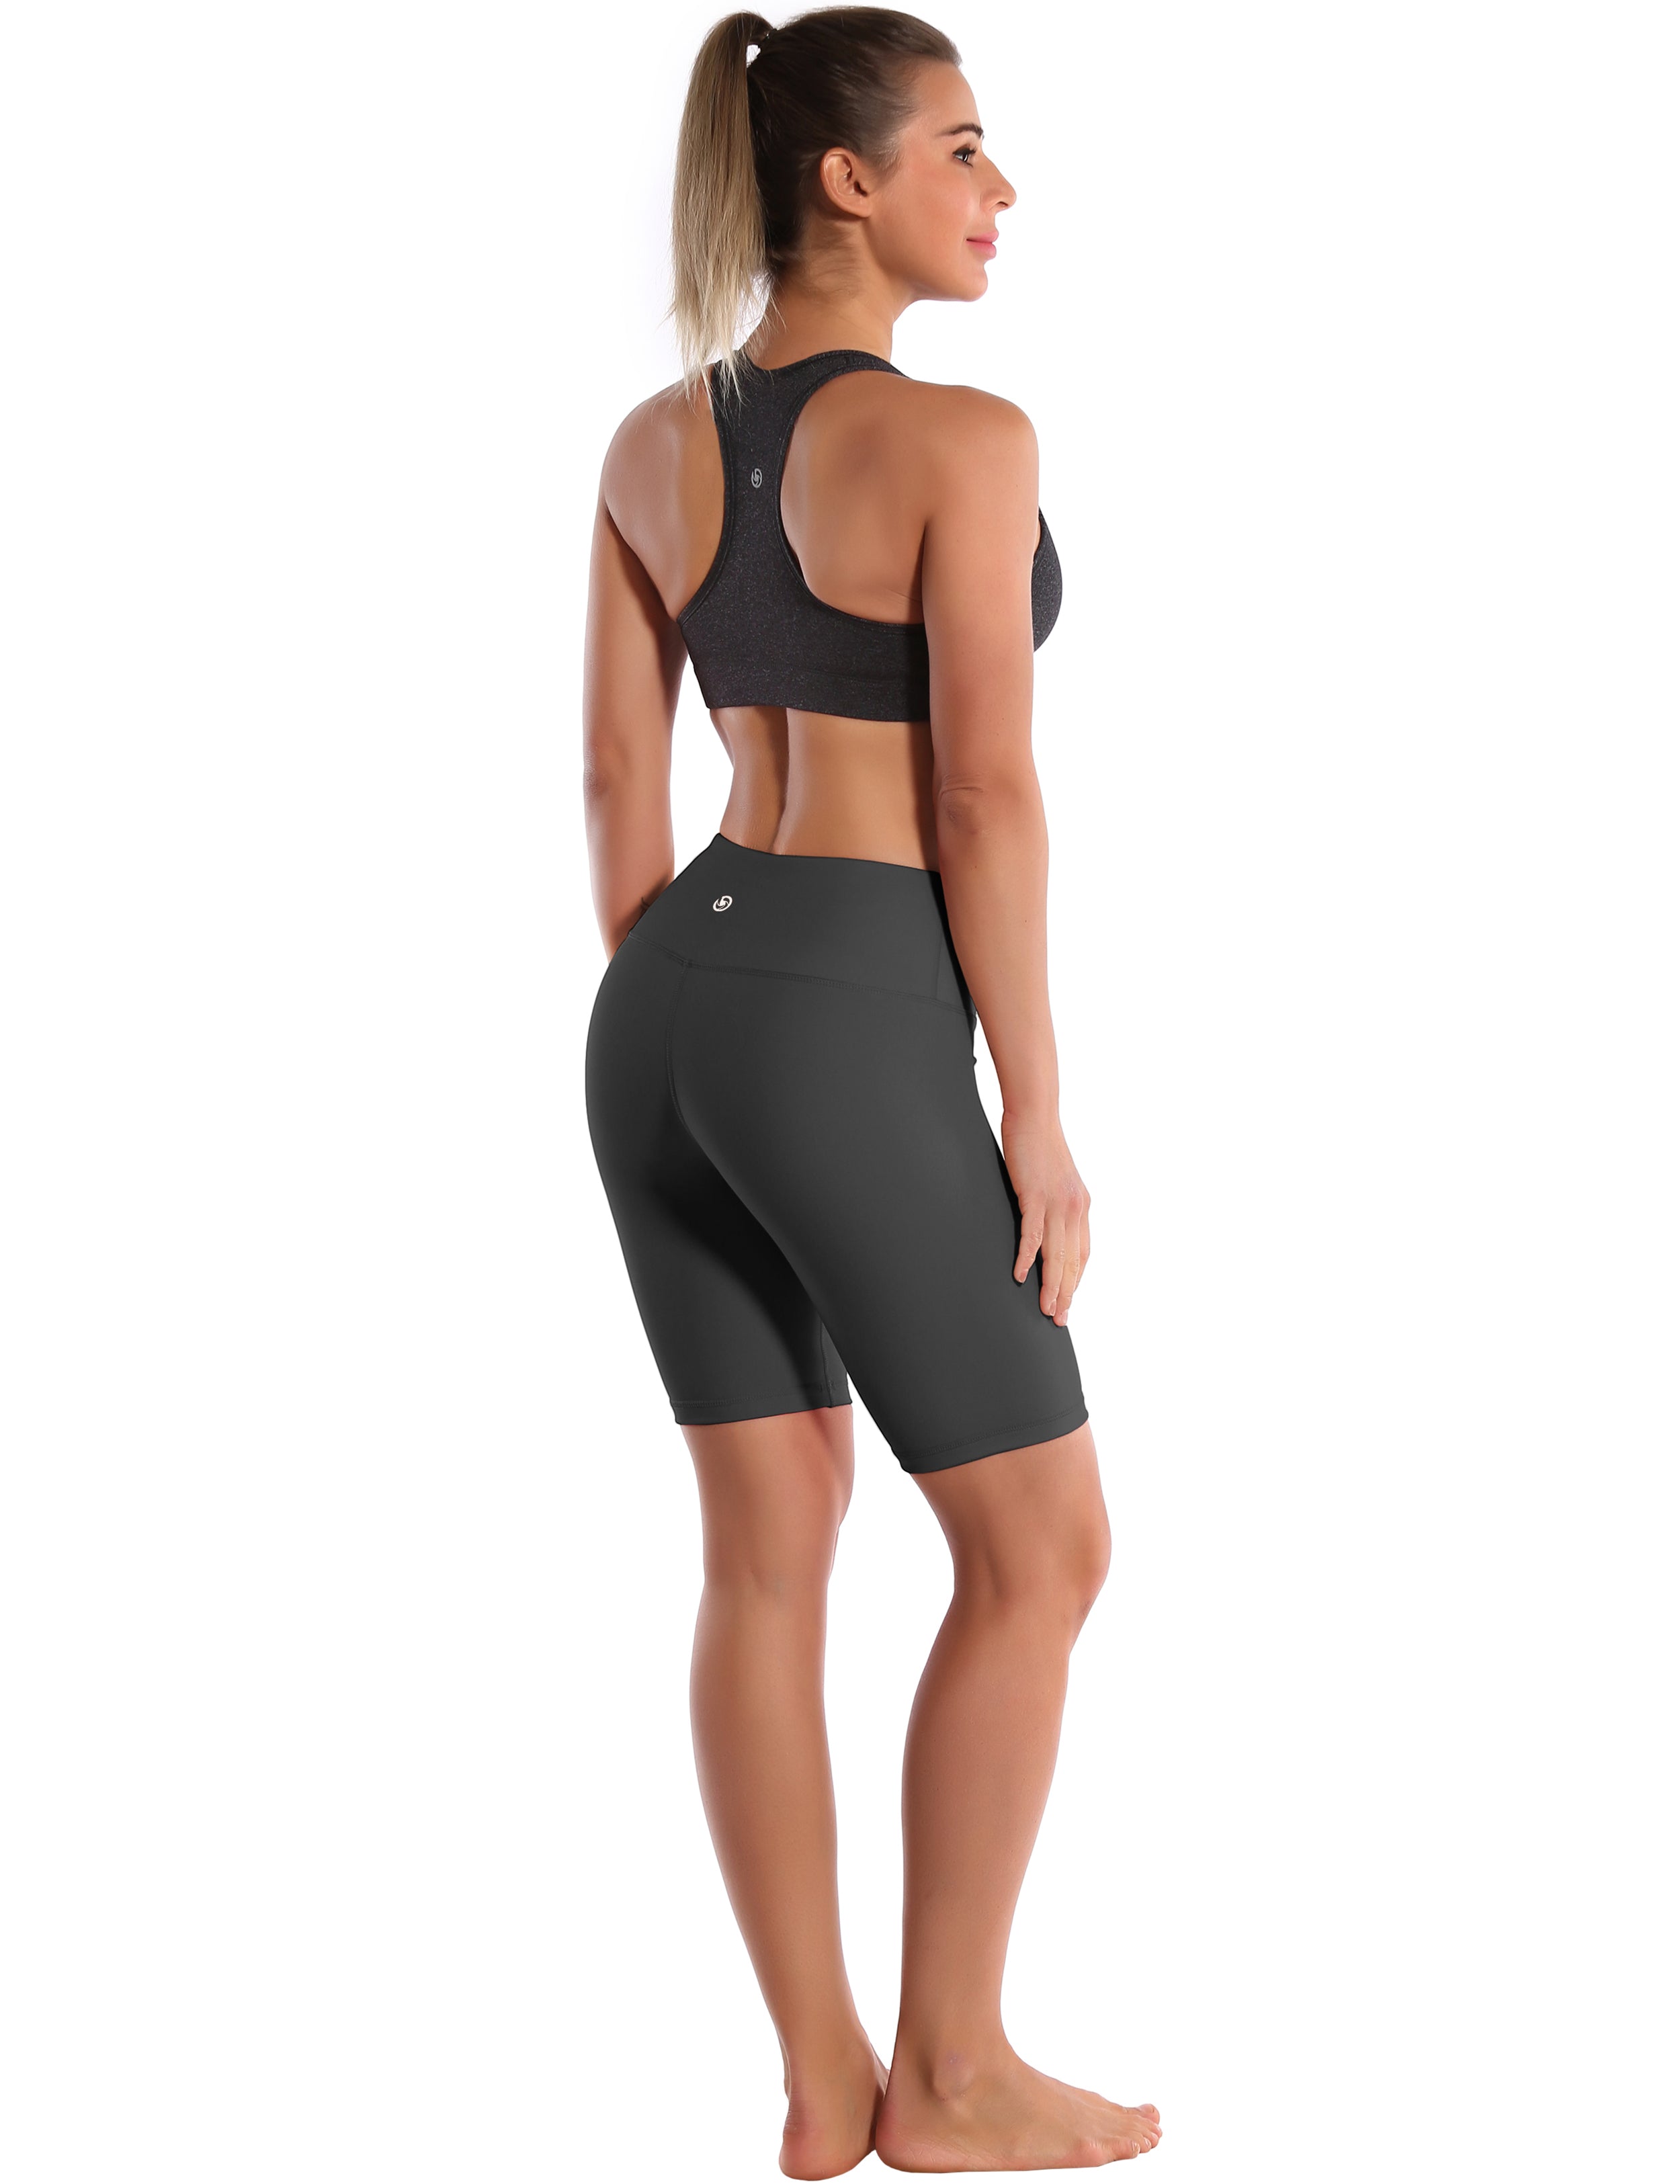 8" High Waist Pilates Shorts shadowcharcoal Sleek, soft, smooth and totally comfortable: our newest style is here. Softest-ever fabric High elasticity High density 4-way stretch Fabric doesn't attract lint easily No see-through Moisture-wicking Machine wash 75% Nylon, 25% Spandex